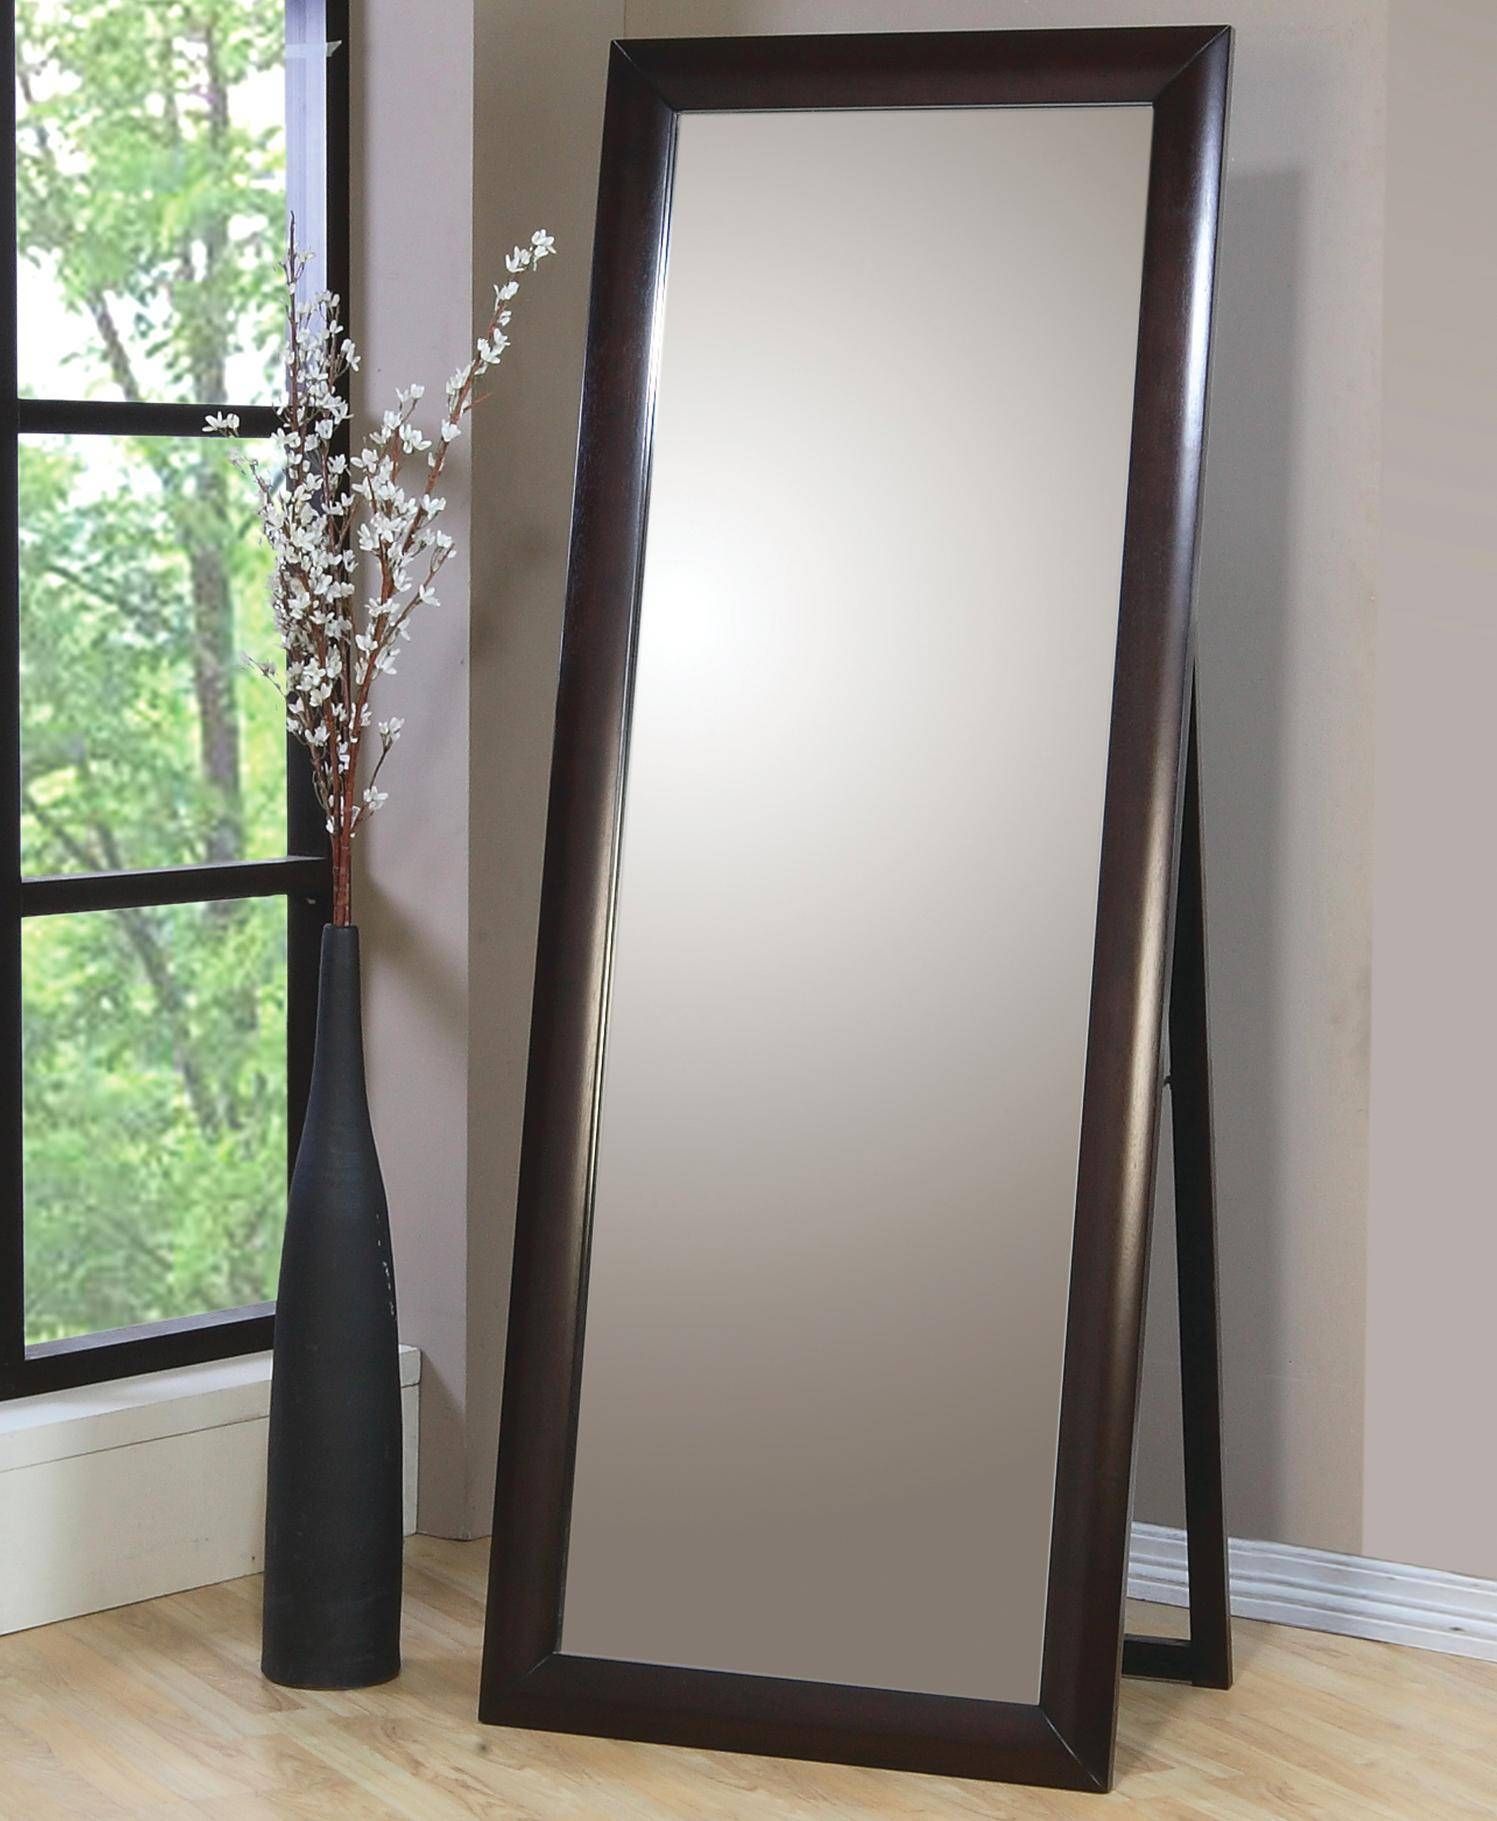 Flooring : Top Brass Vintage Retro Wallrror Full Length Loaf Throughout Full Length Vintage Standing Mirrors (View 7 of 25)